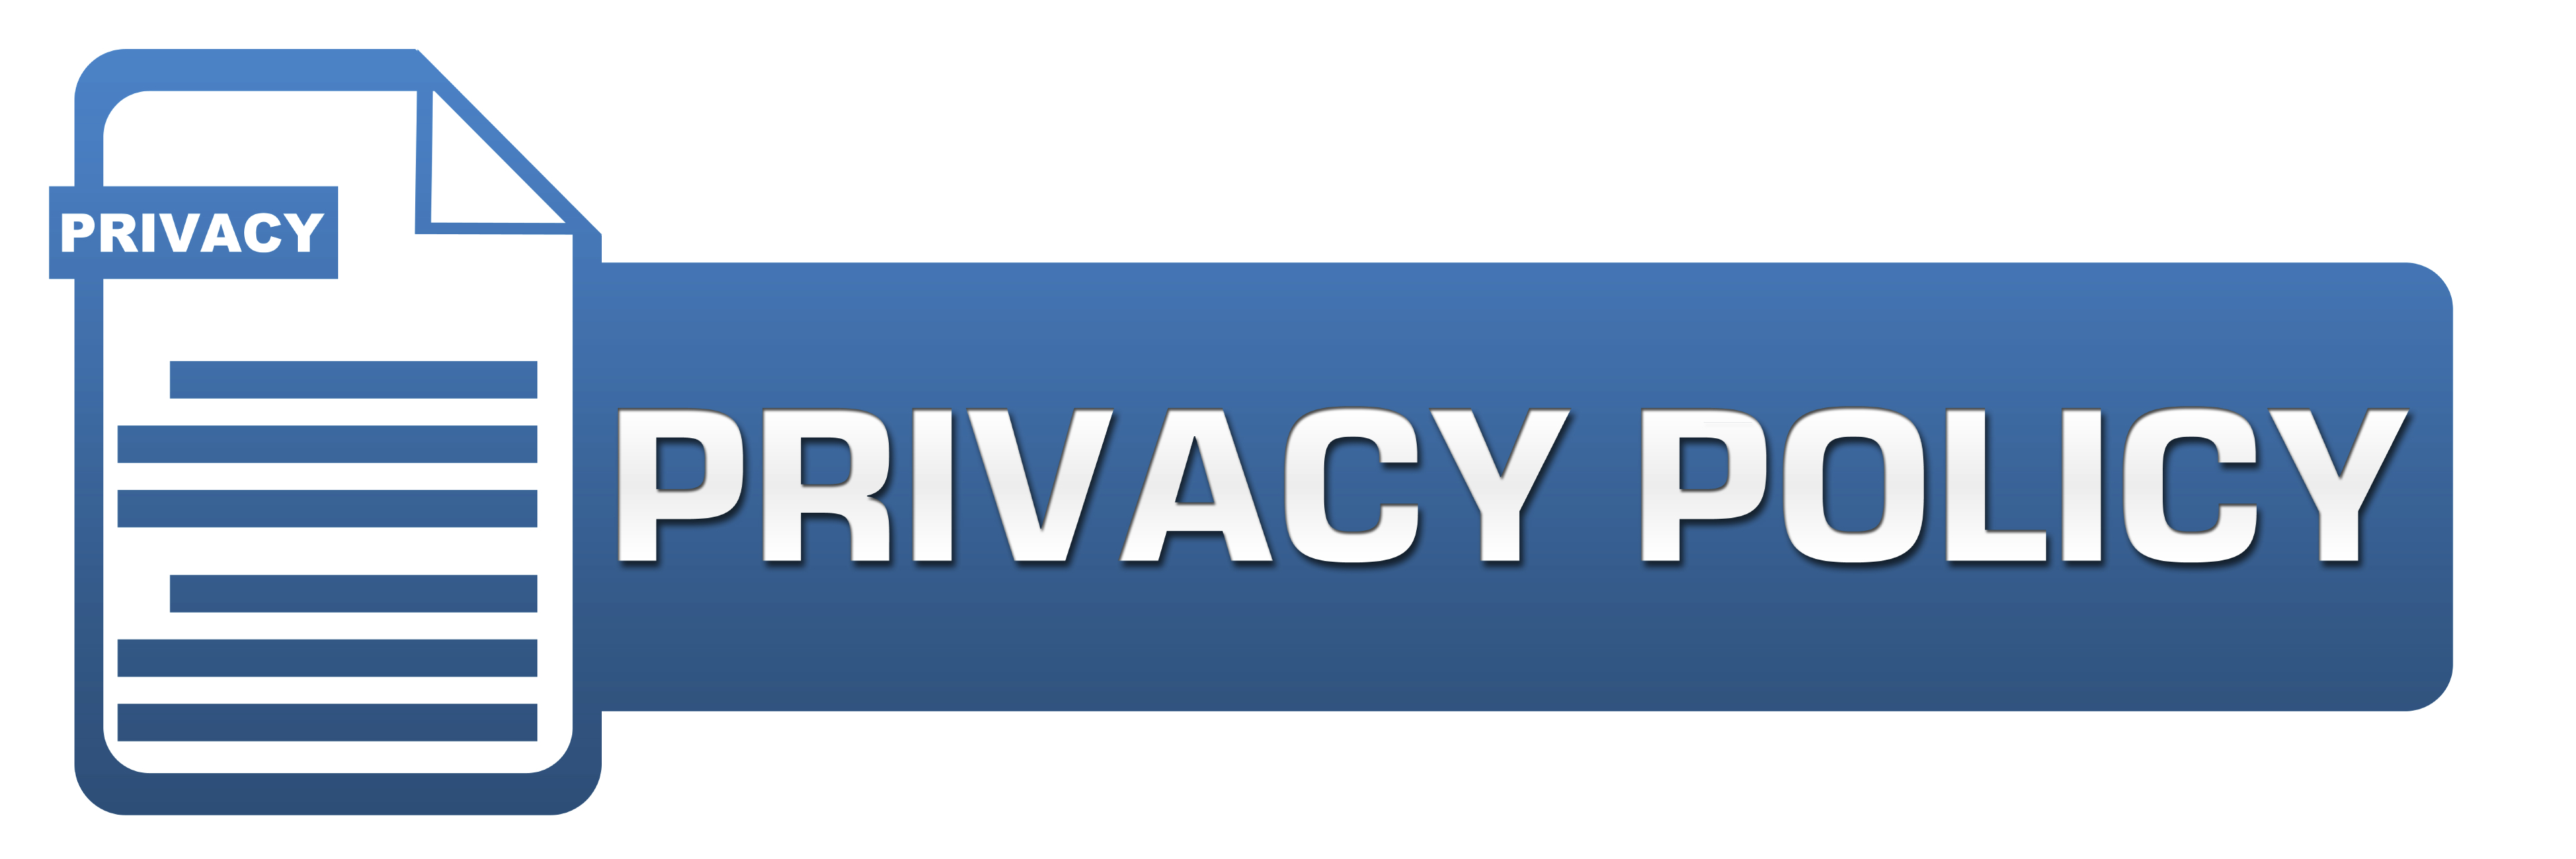 Privacy policy 21